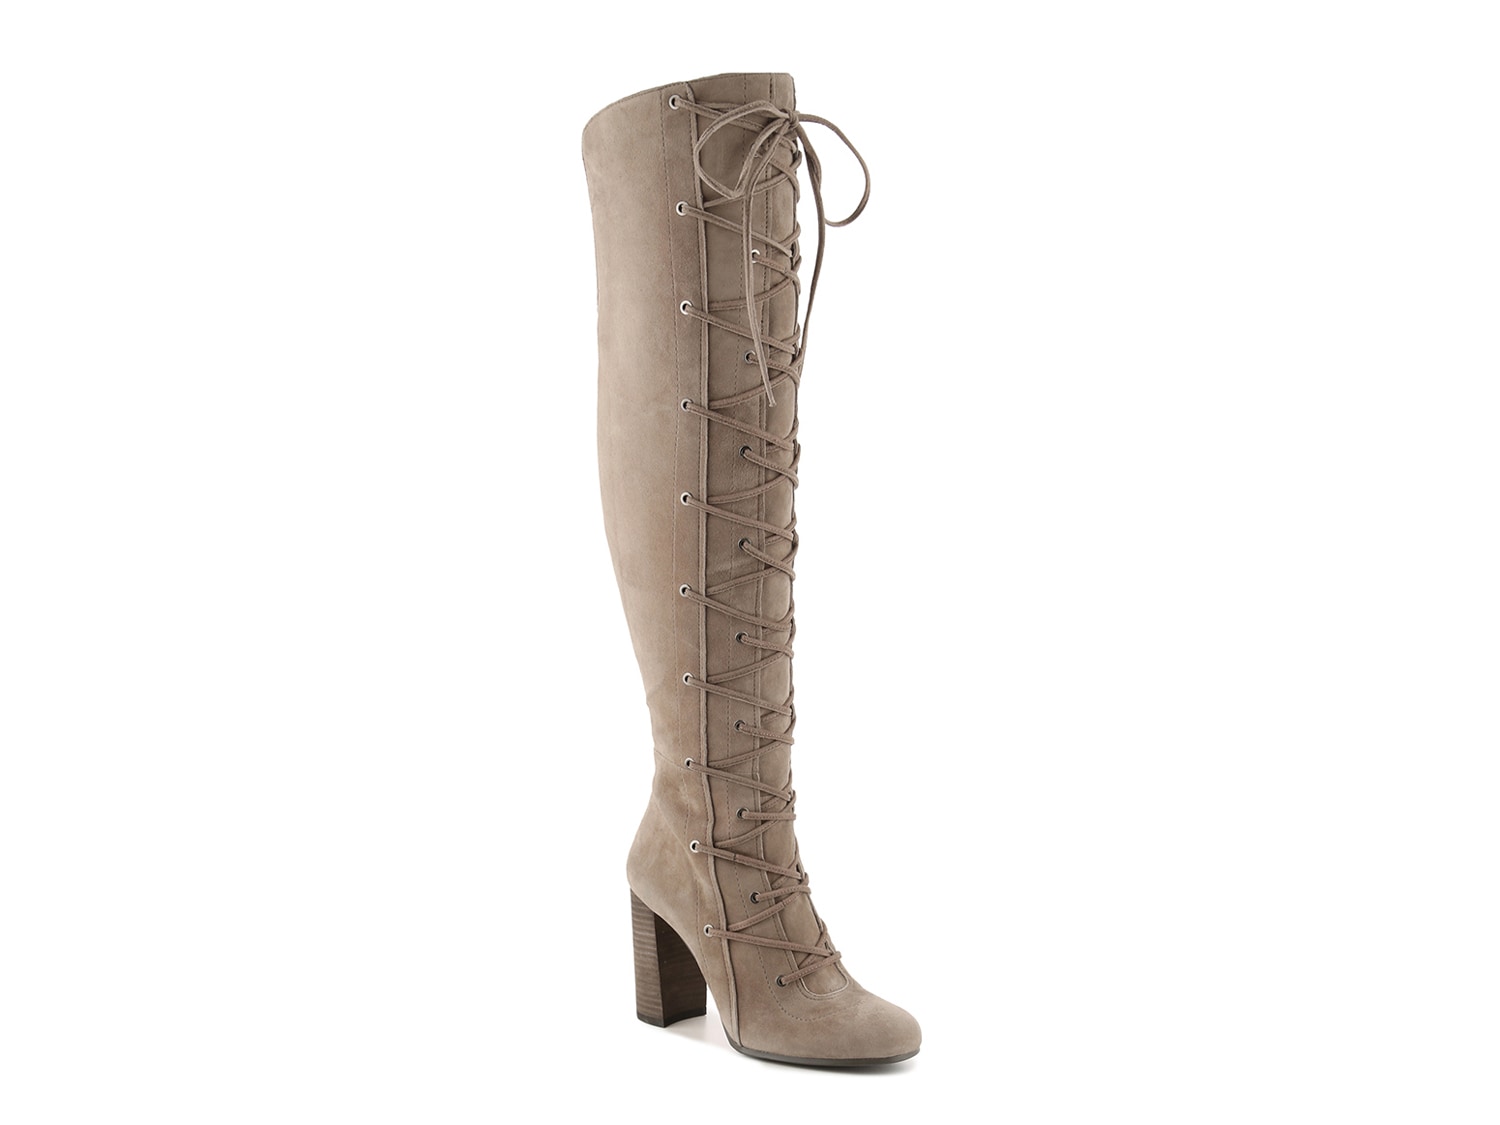 Vince Camuto Thanta Over-the-Knee Boot - Free Shipping | DSW